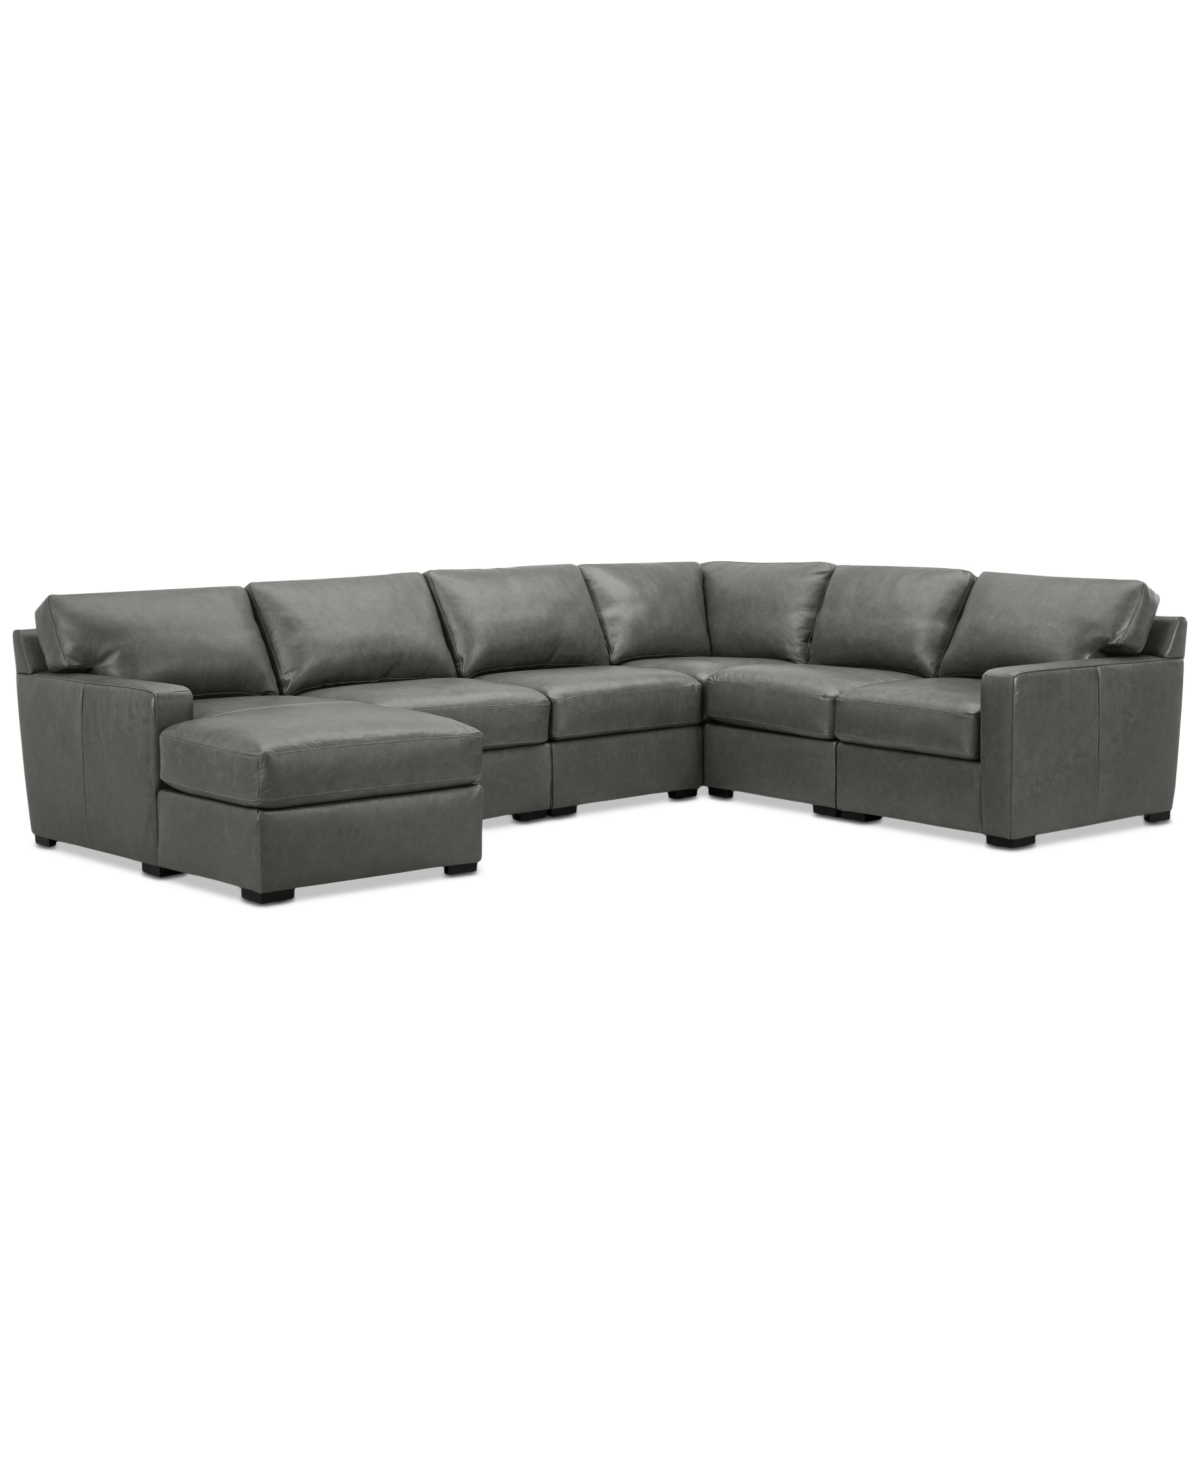 Macy's Radley 129" 6-pc. Leather Square Corner Modular Chaise Sectional, Created For  In Anthracite